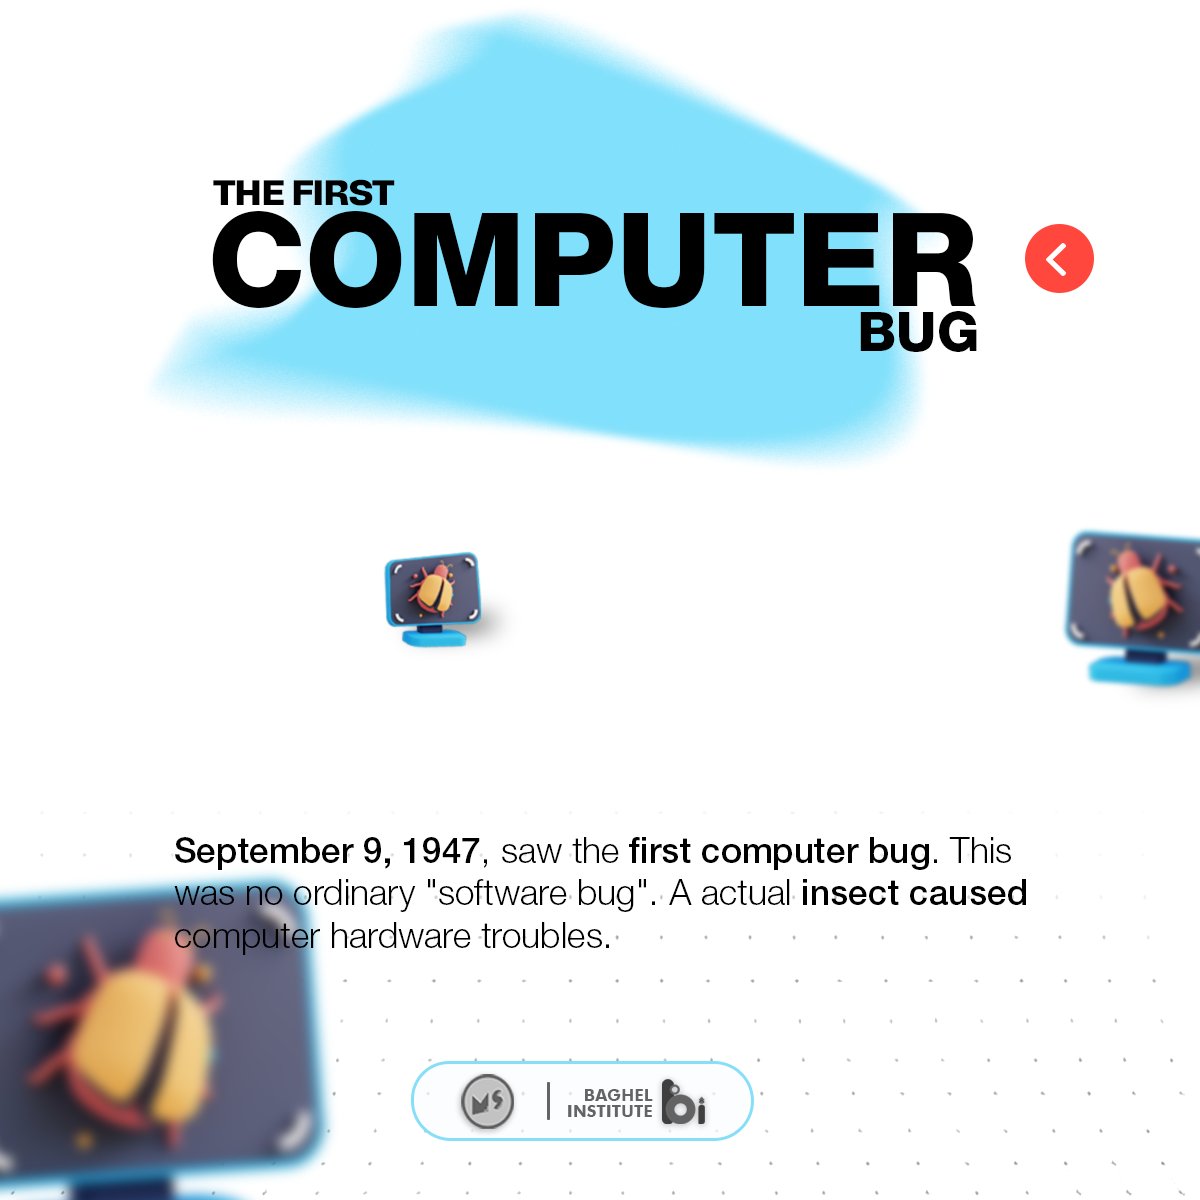 The first computer bug is a actual insect, caused computer hardware troubles !!!
#computerbugs #firstbug #TechGlitch #SoftwareBug #BugFix #CodeError #TechBugs #SoftwareGlitch #Debugging #CodingBugs #TechProblems #boostyourknowledge #study #baghelcomputercentre #miniatureschool